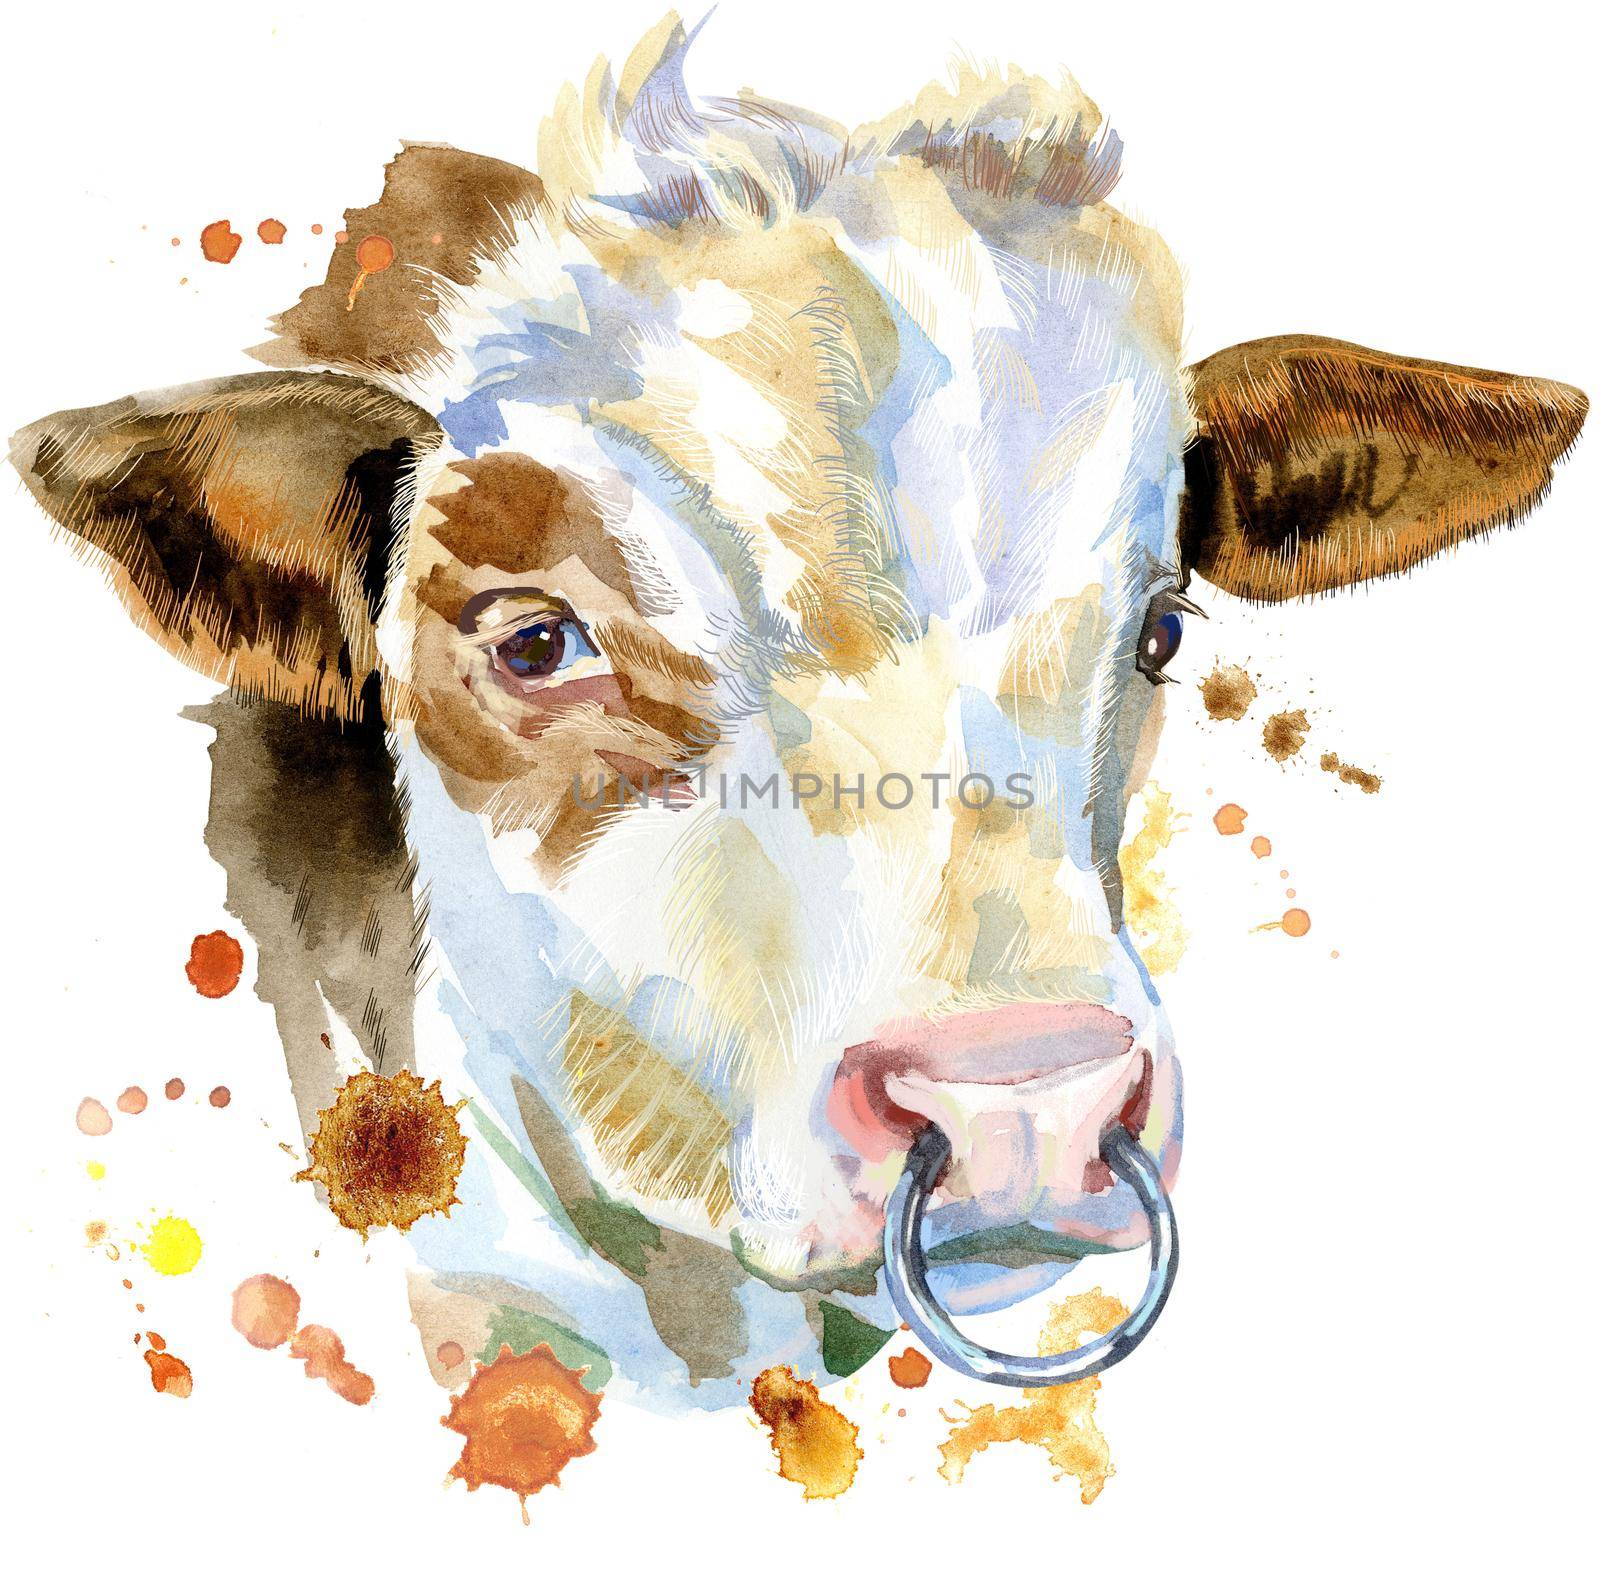 Bull watercolor graphics. Bull animal illustration with splash watercolor textured background.